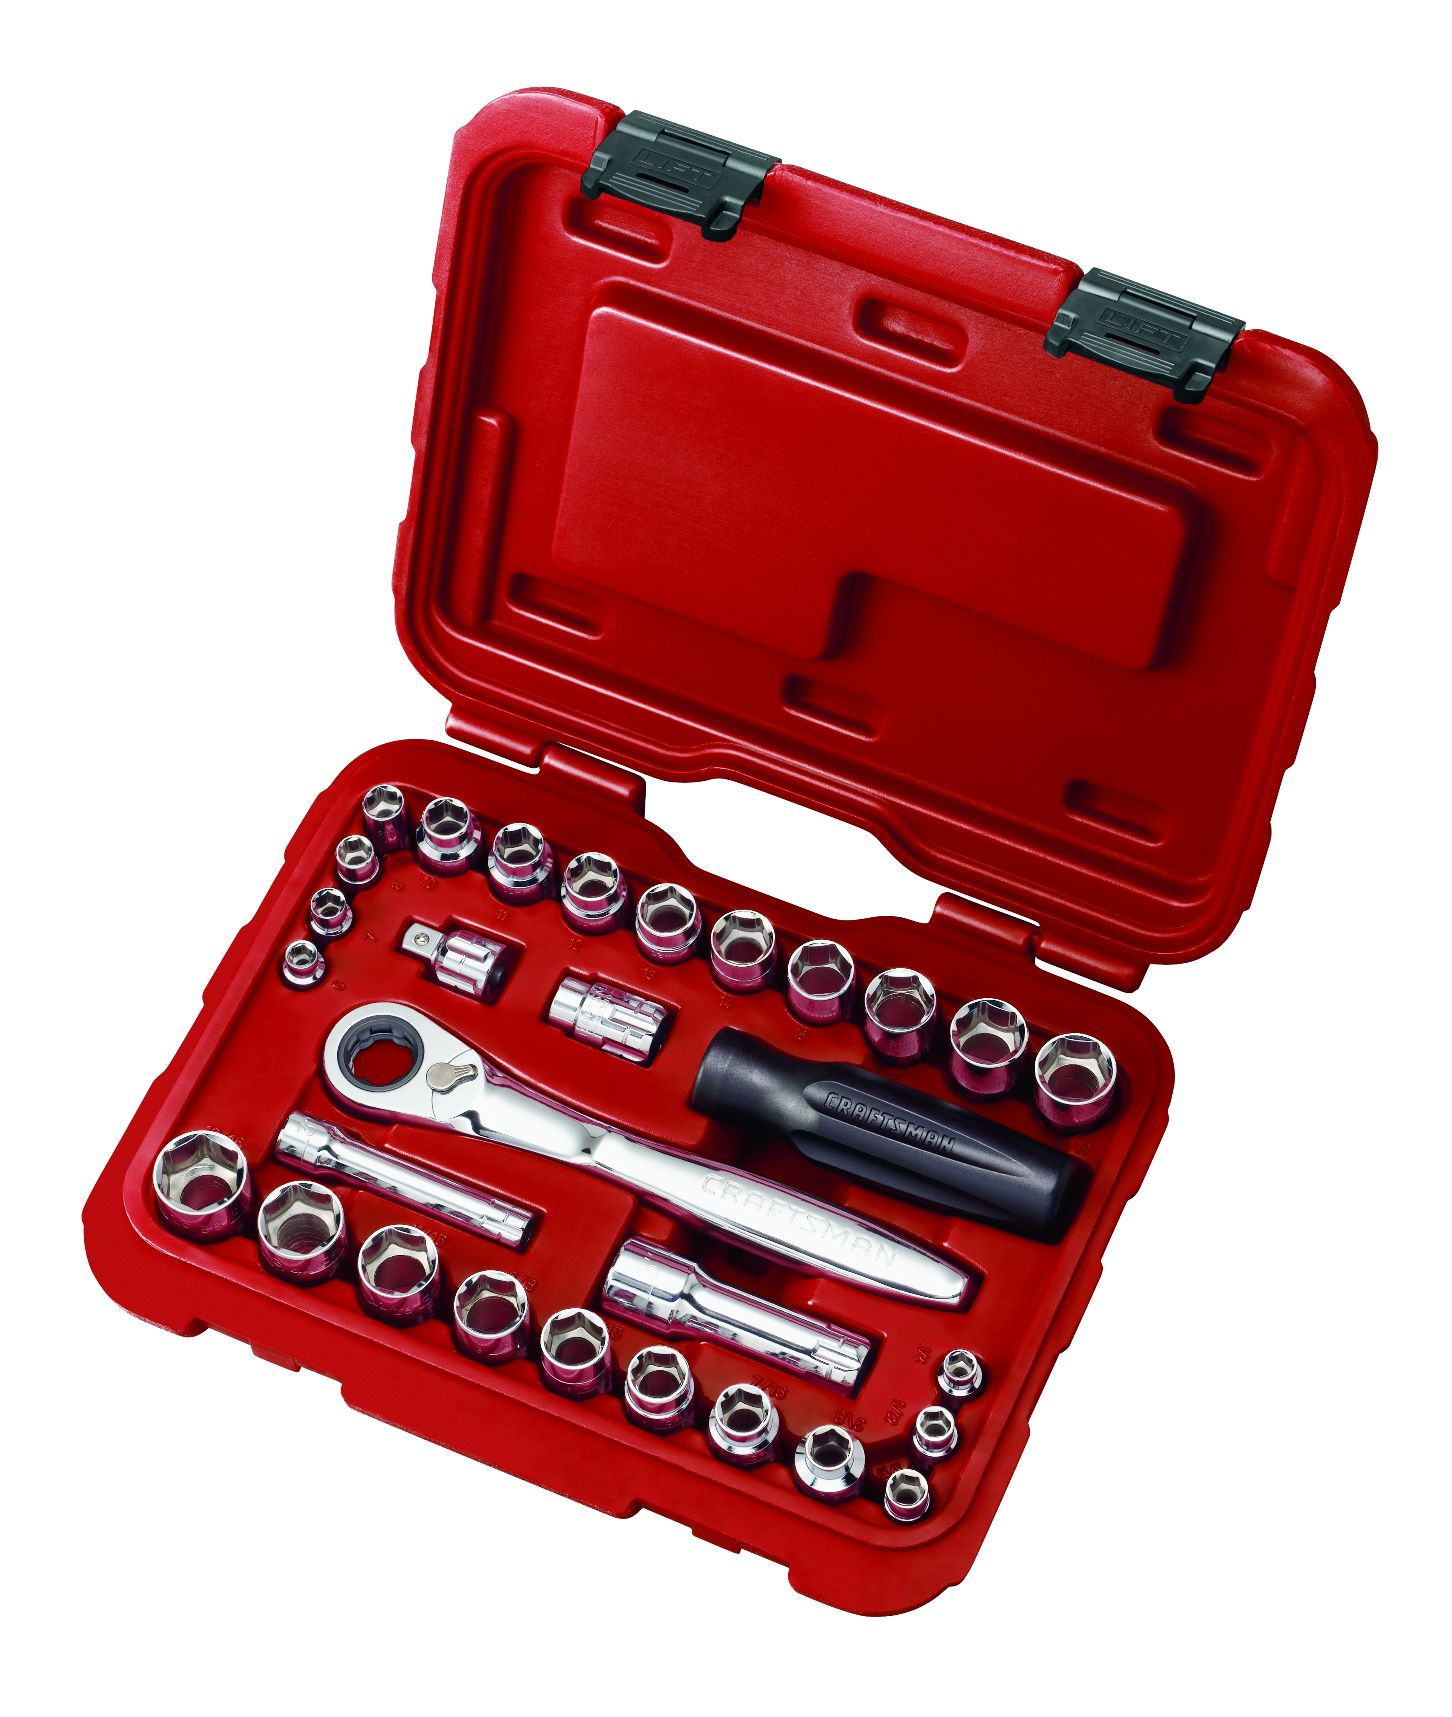 Craftsman 30pc Max Axess 1/4 & 3/8-in Drive Socket Wrench Set with Rugged Case 